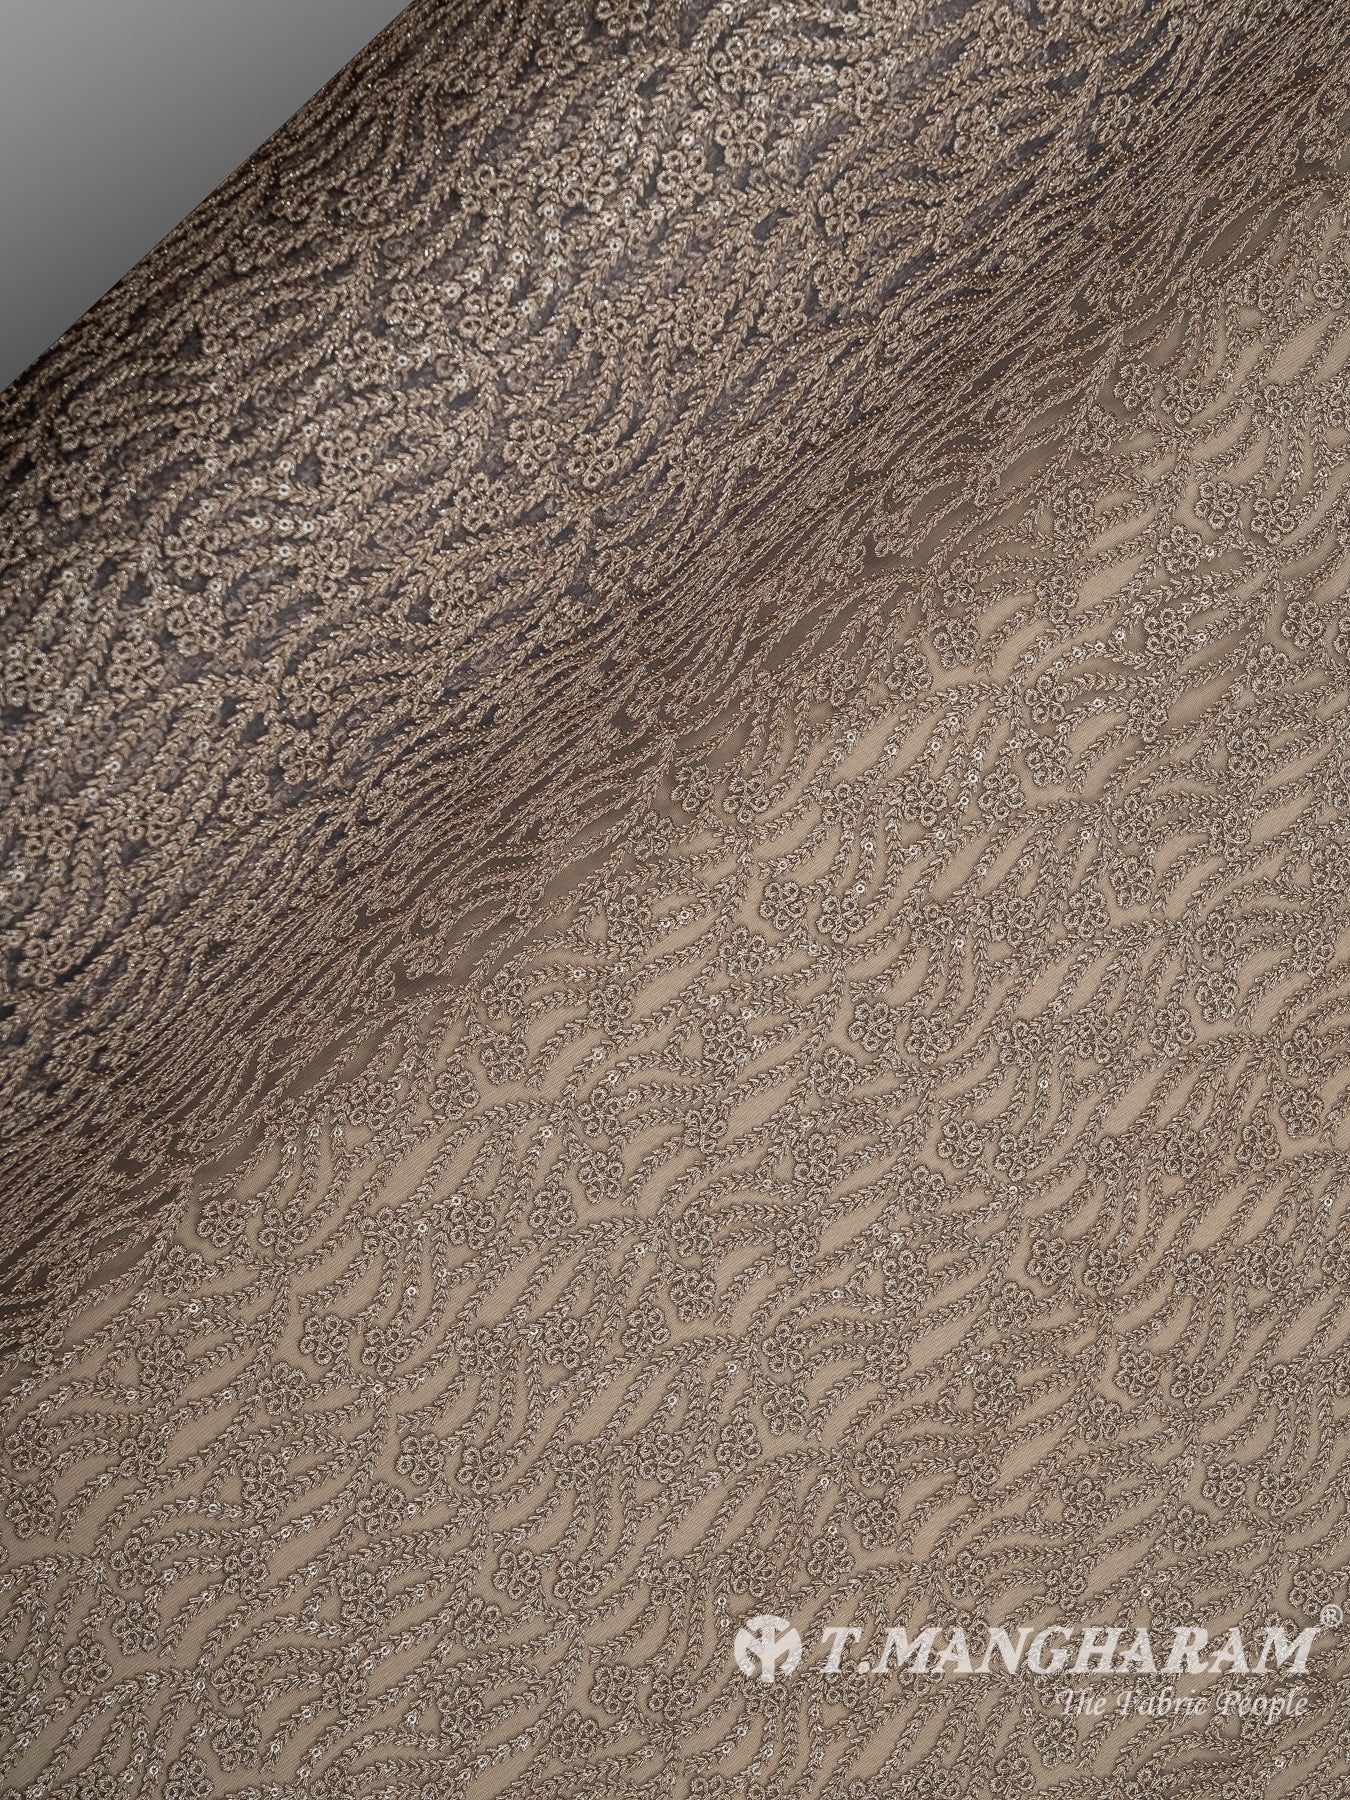 Beige Net Embroidery Fabric - EC8429 view-2